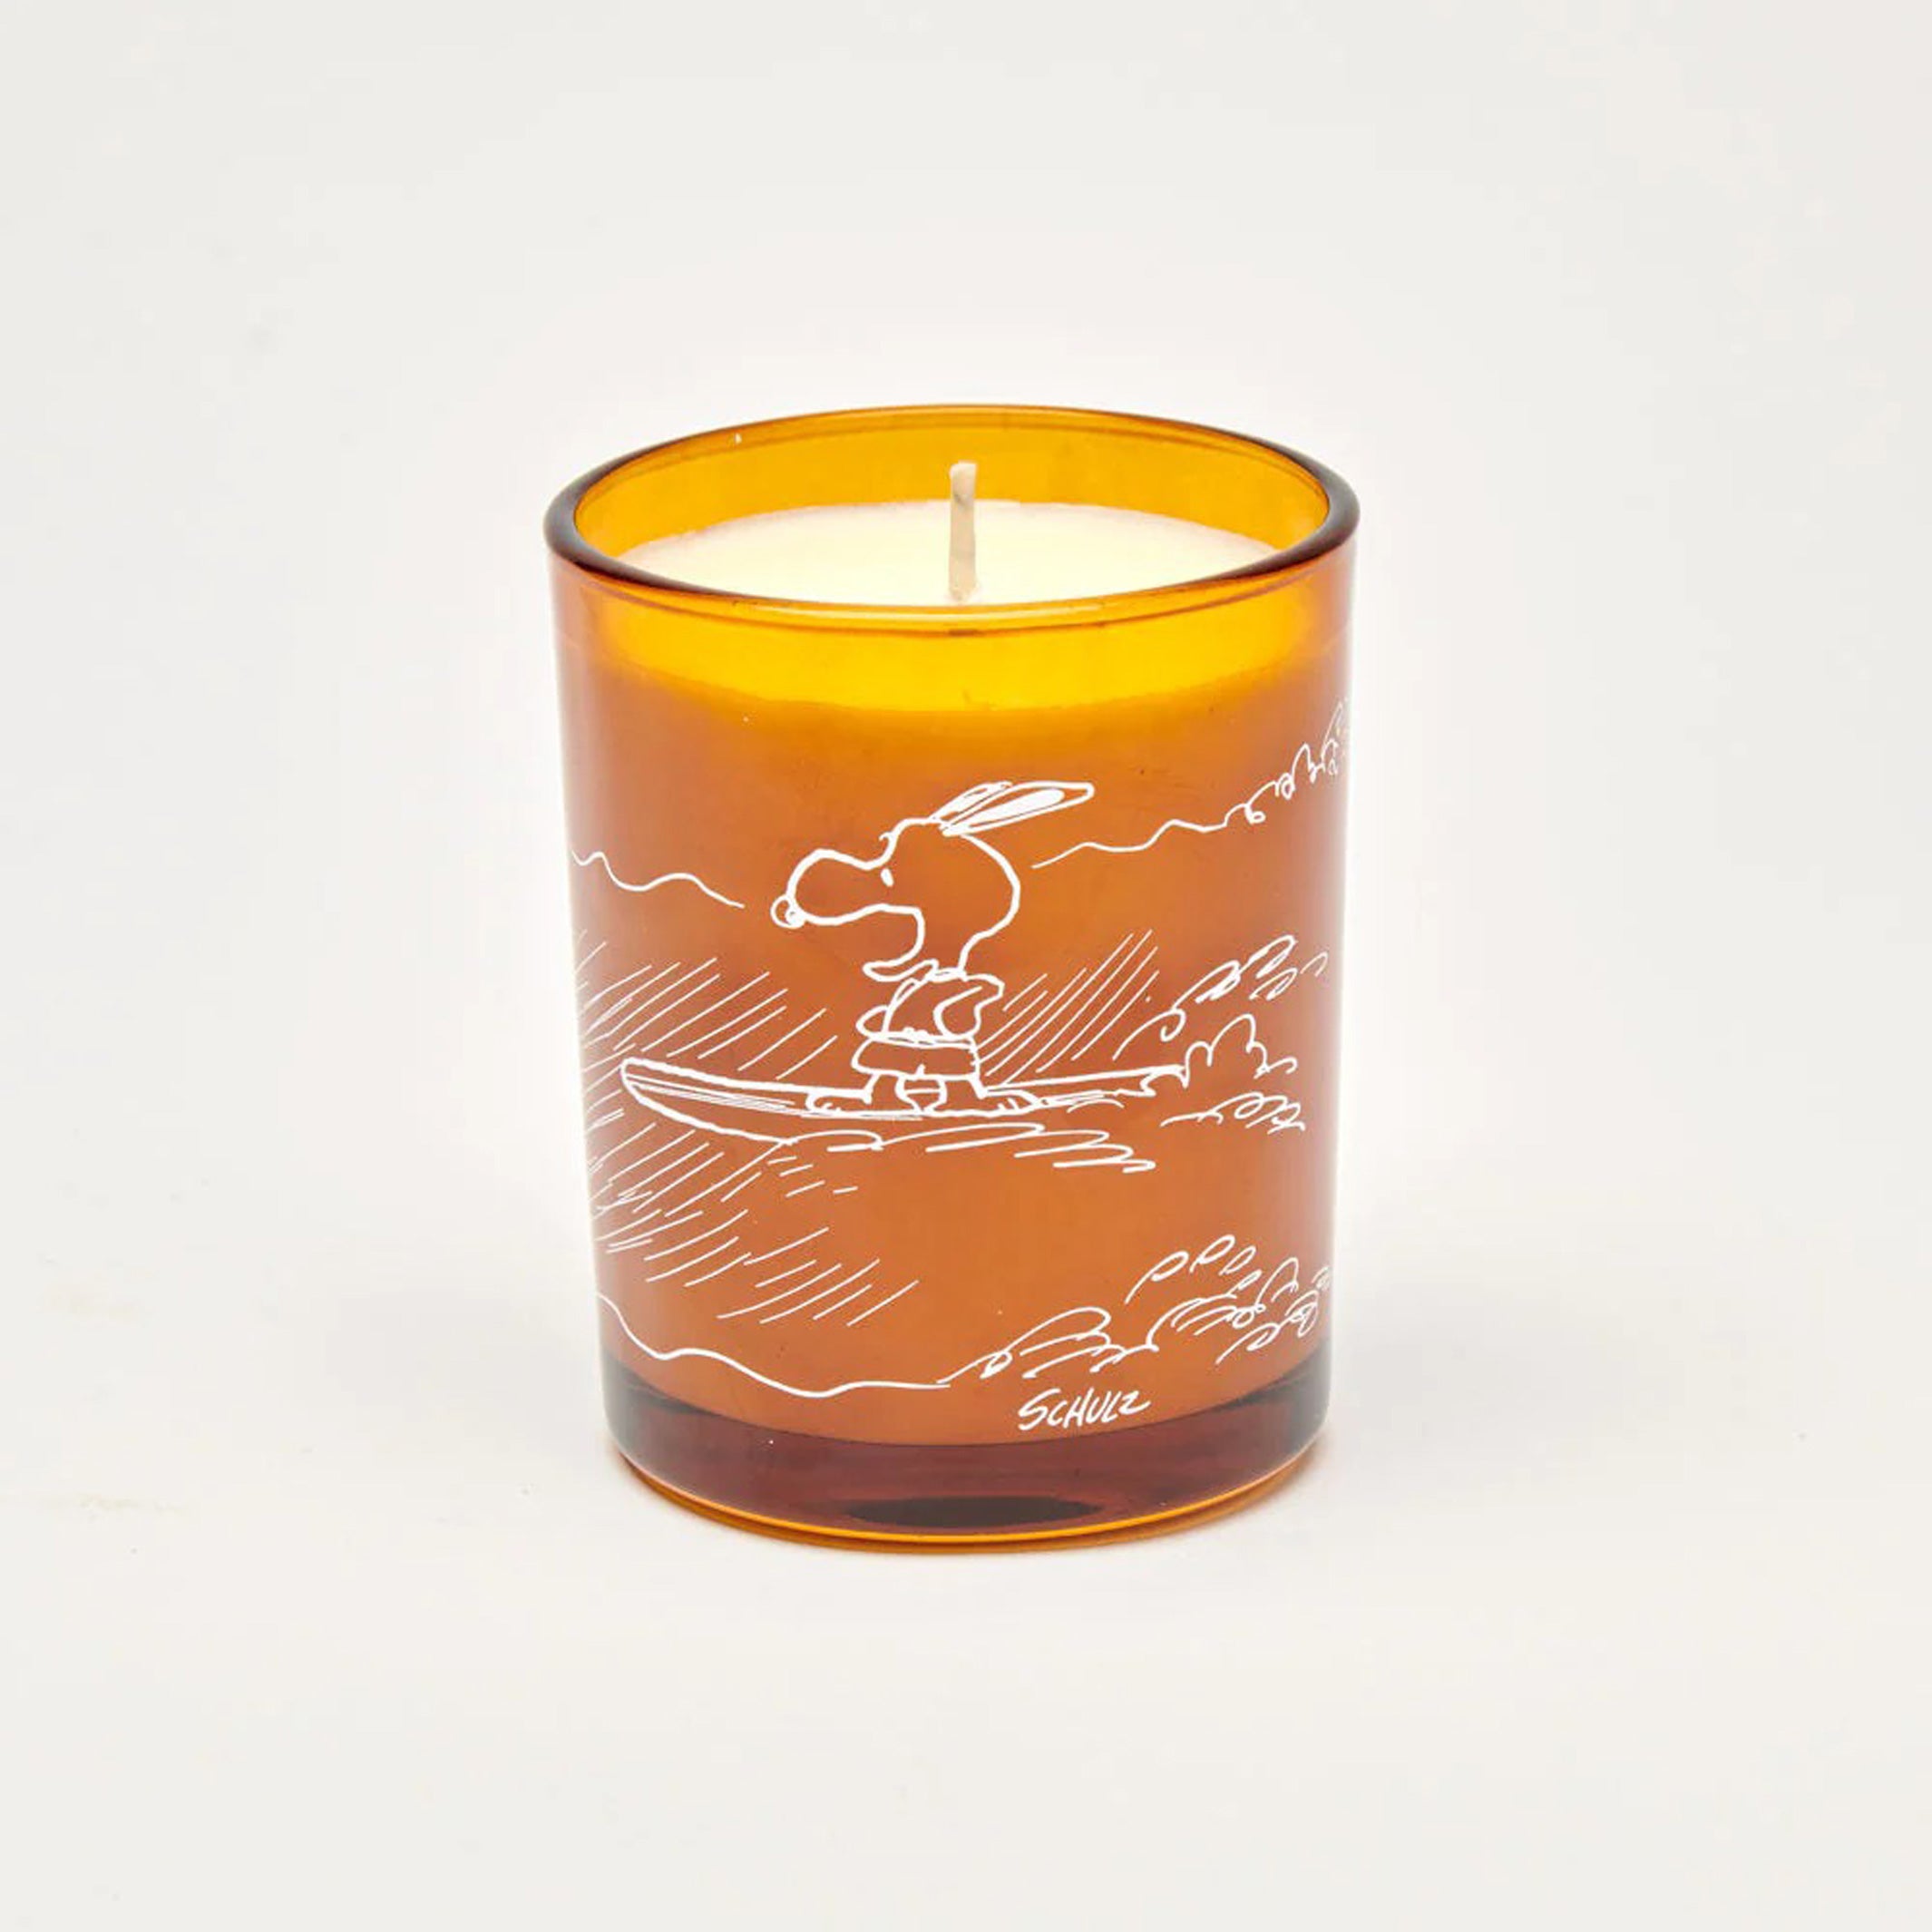 PEANUTS - SURF'S UP CANDLE | Vegan, Vegetable WAX CANDLE | Sea Spray & Kelp | Magpie